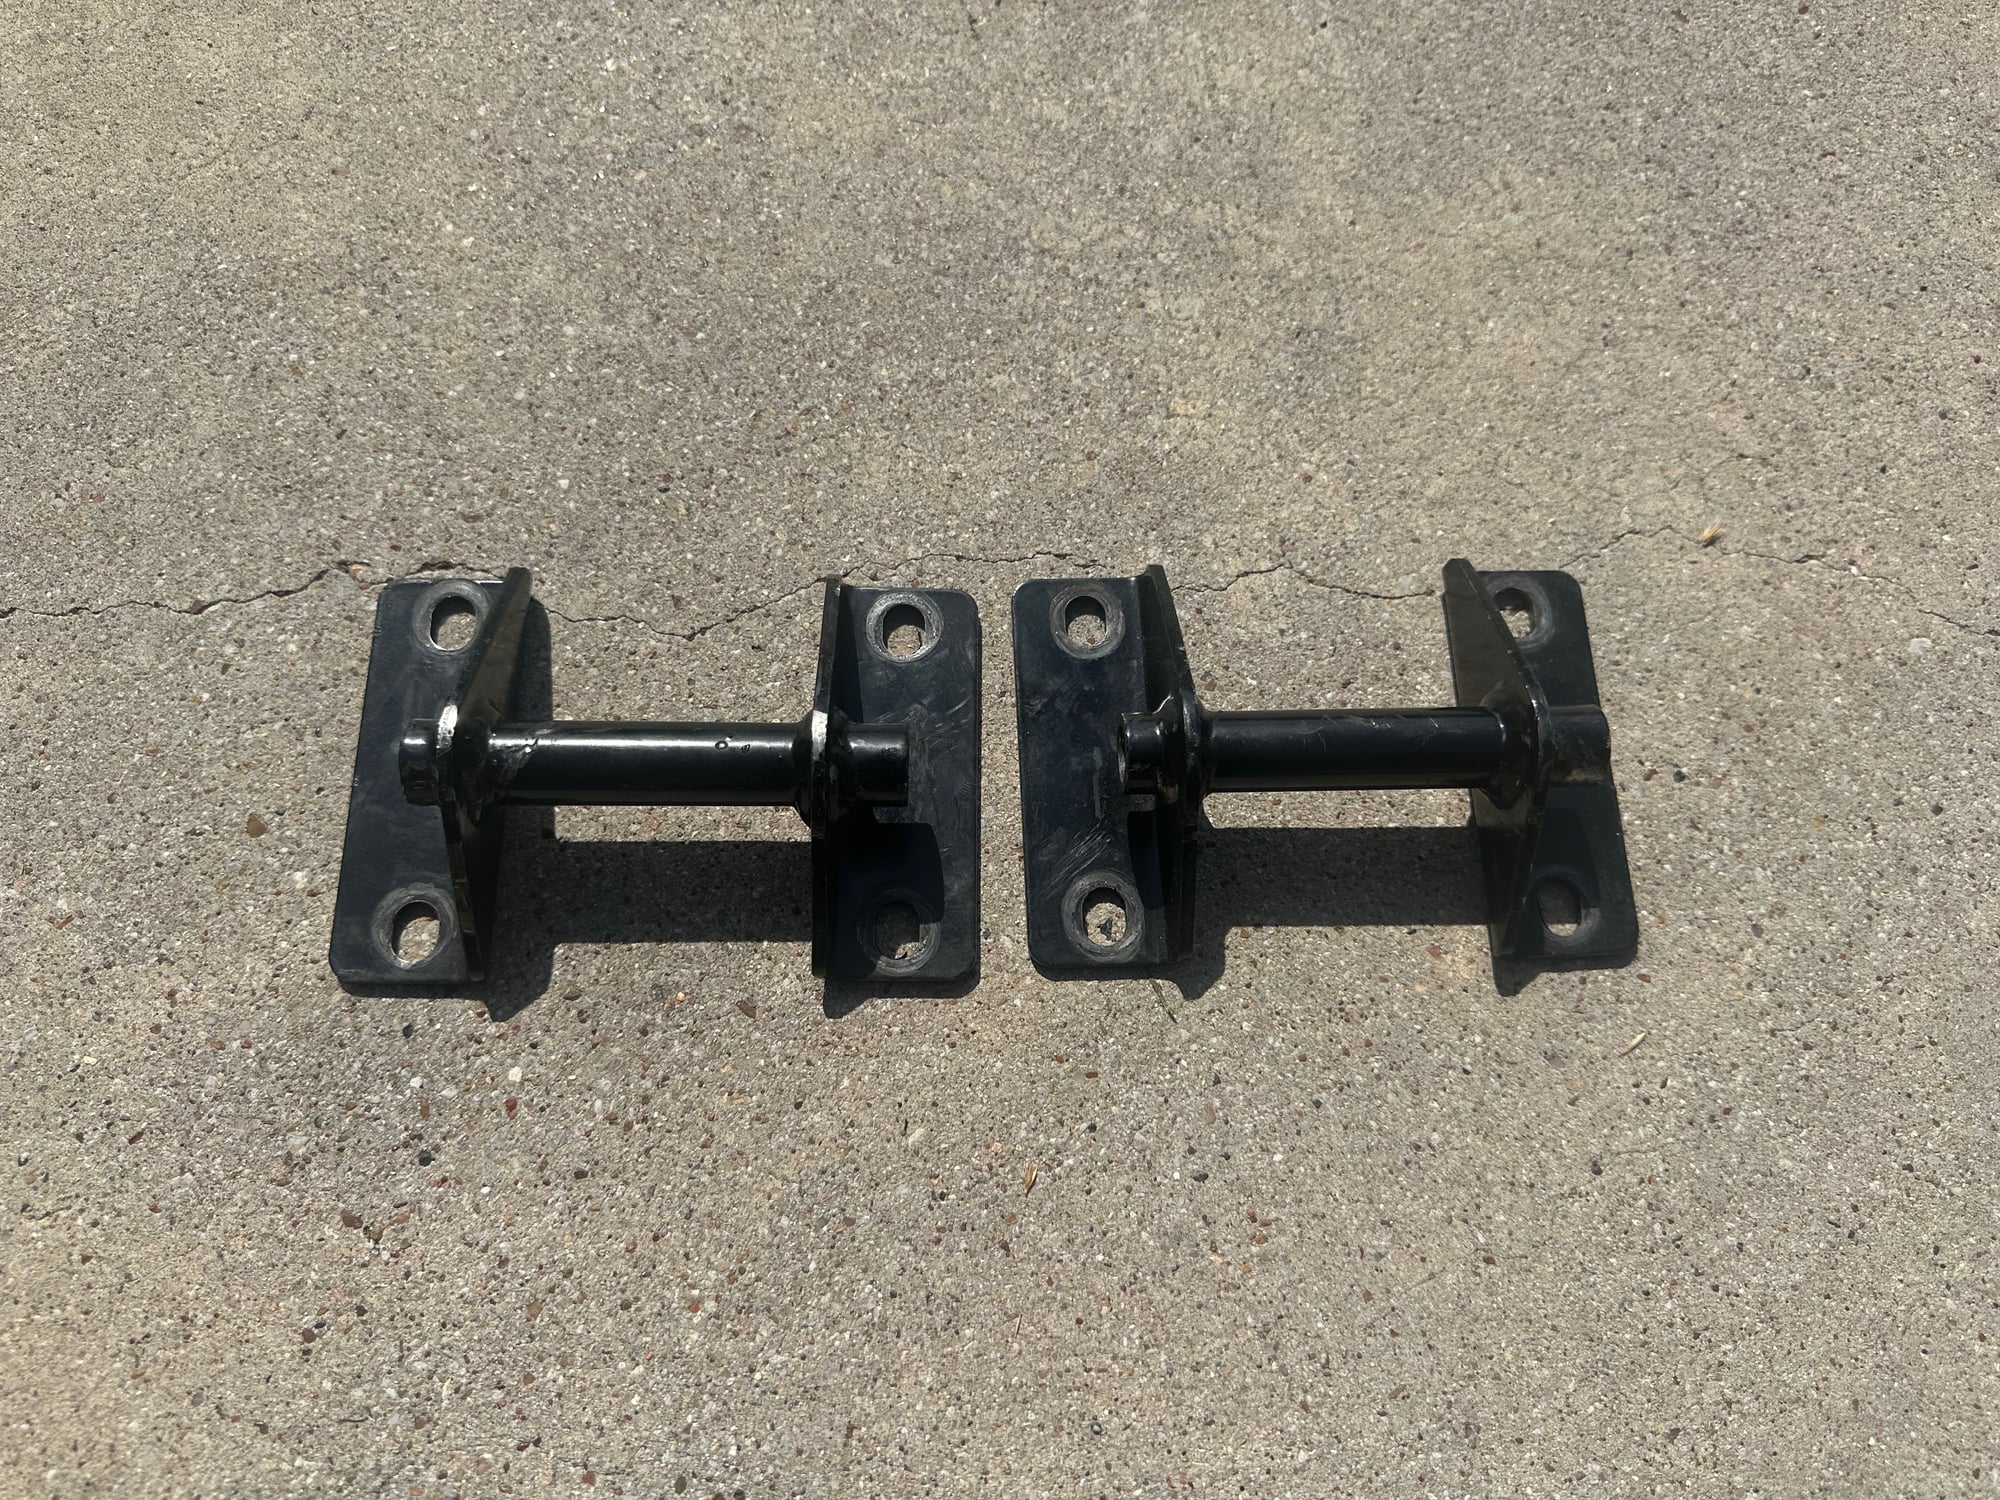 Steering/Suspension - Midwest solid motor mounts - Used - 0  All Models - Justin, TX 76247, United States